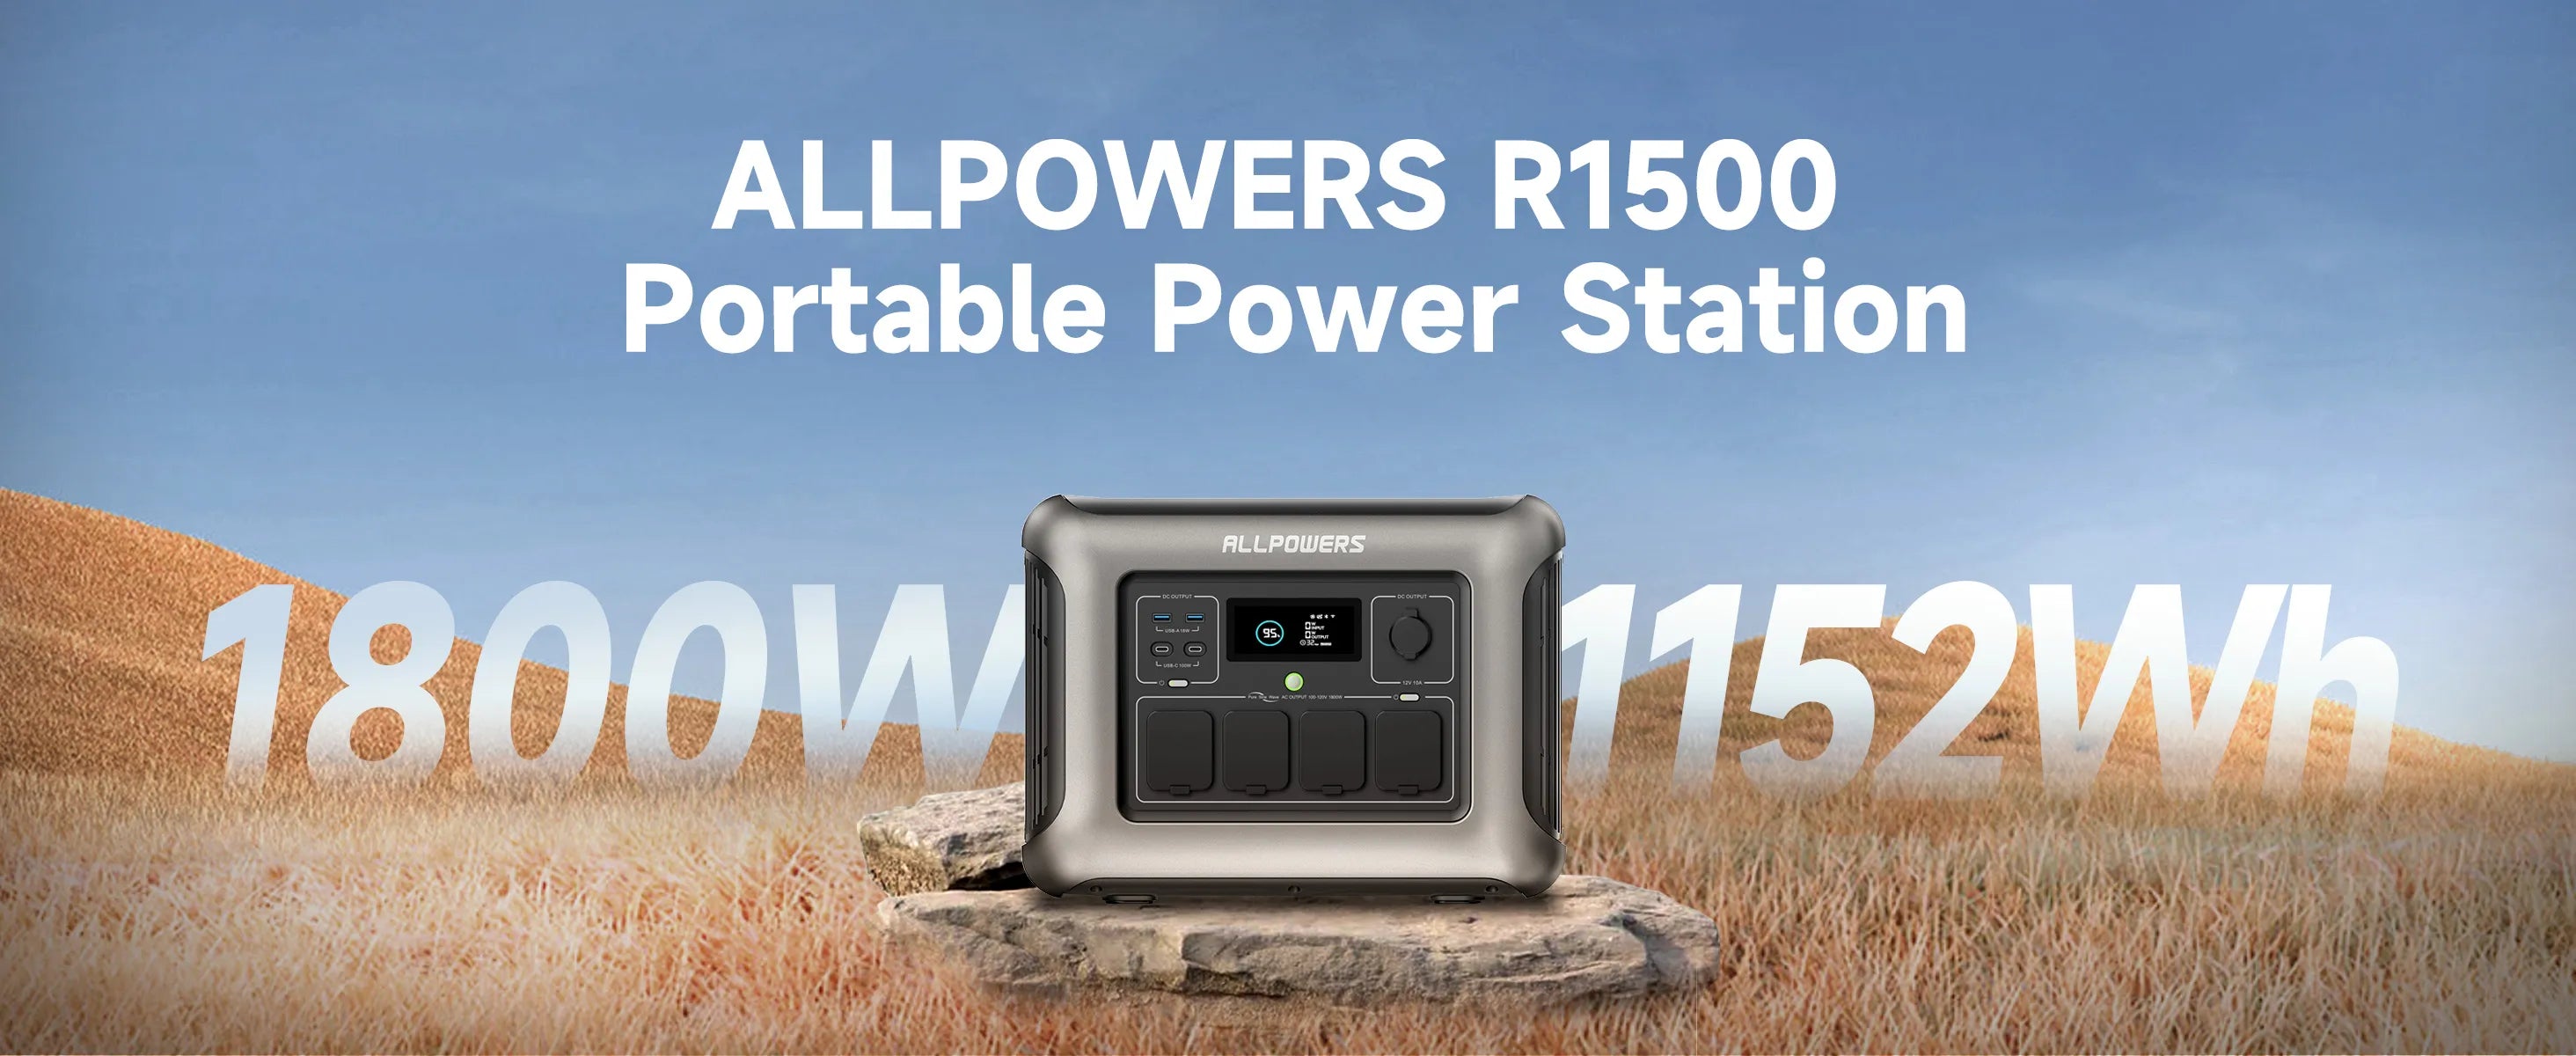 ALLPOWERS R1500 portable home backup power station is massive